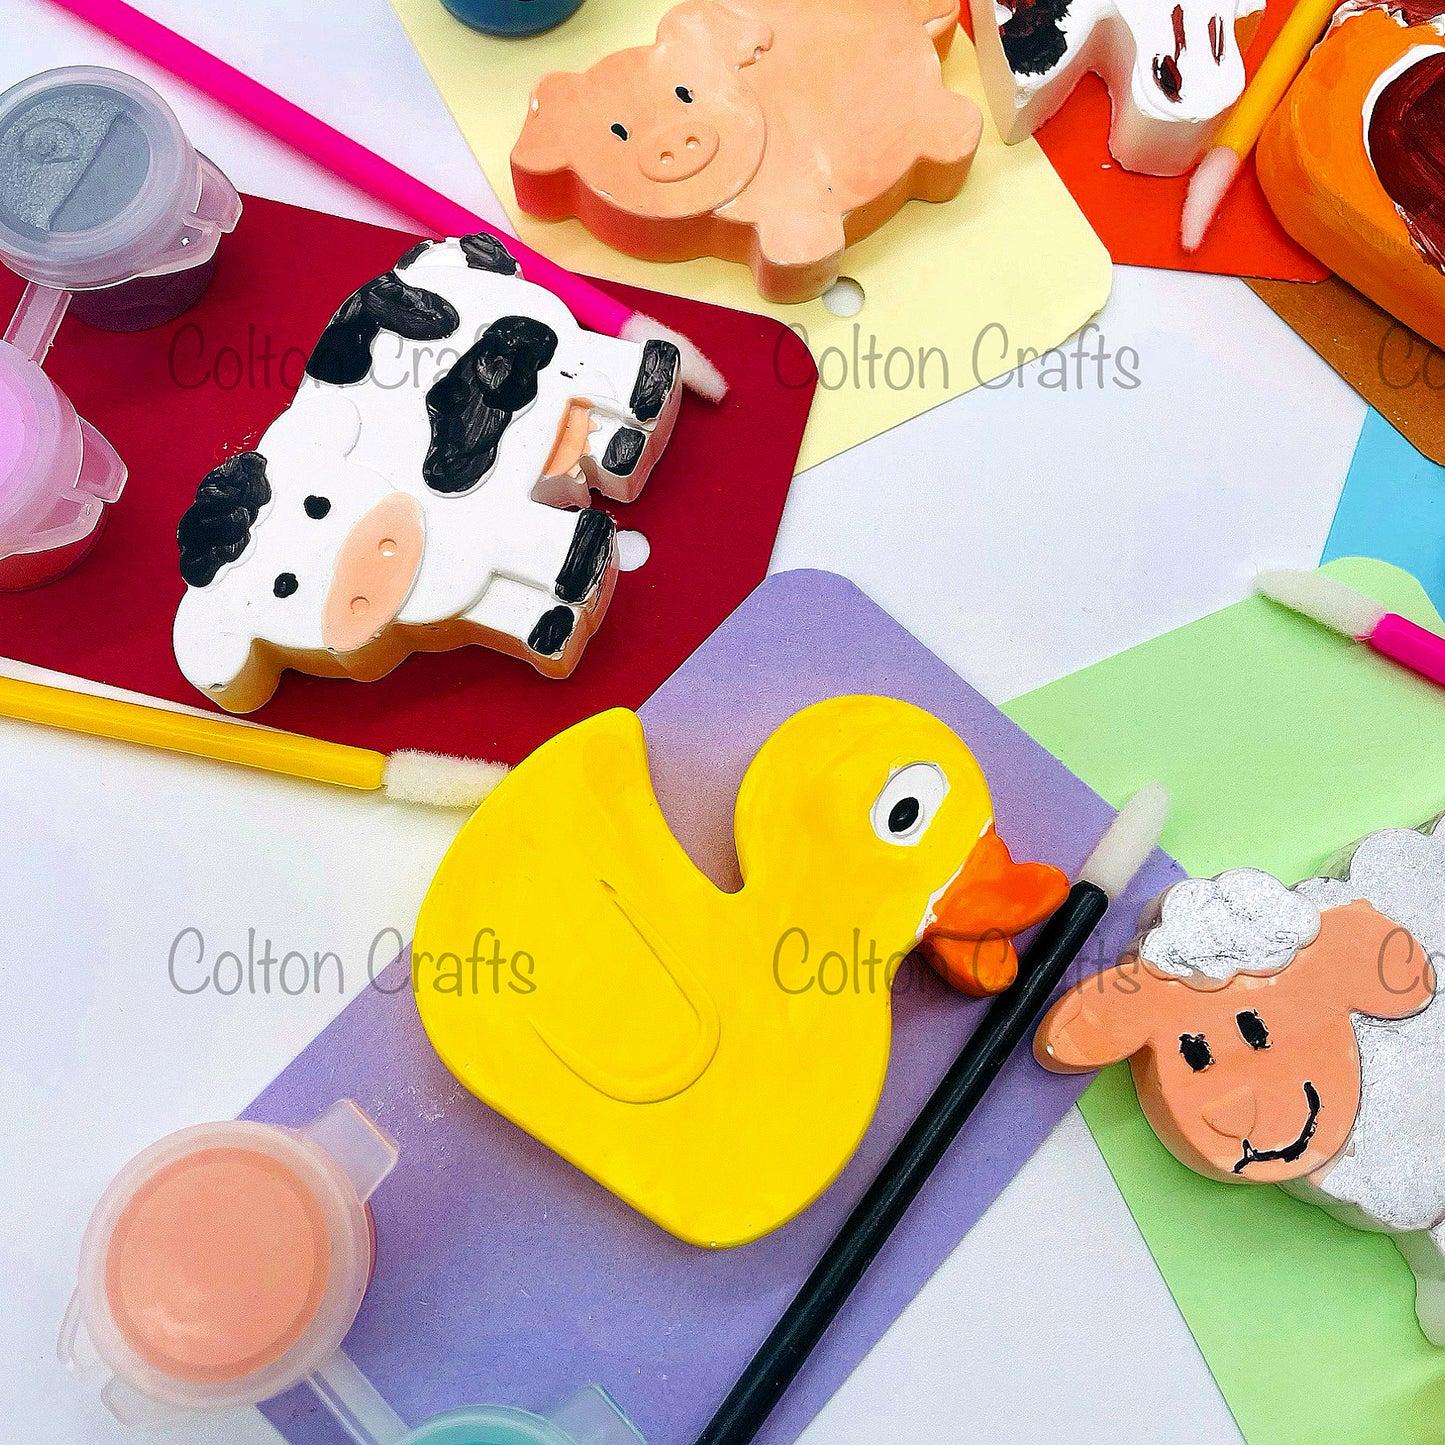 Farm Animal Party Bags With 2 Paints - Mix & Match - Farm theme - Animals - Magnet Option Available